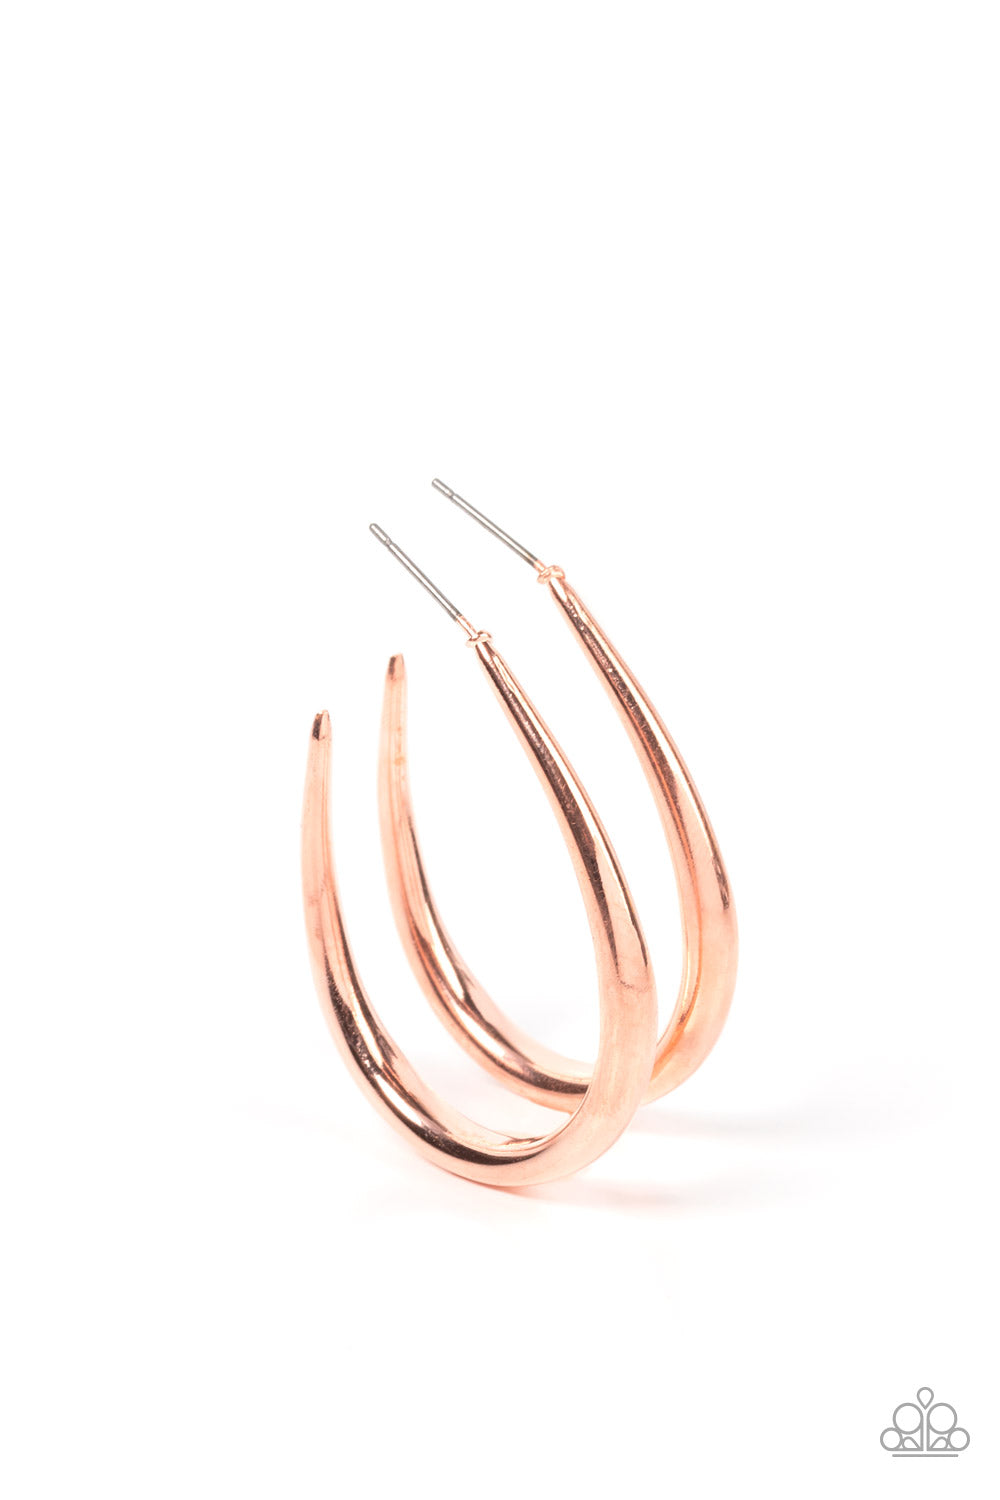 CURVE Your Appetite - Copper Earring